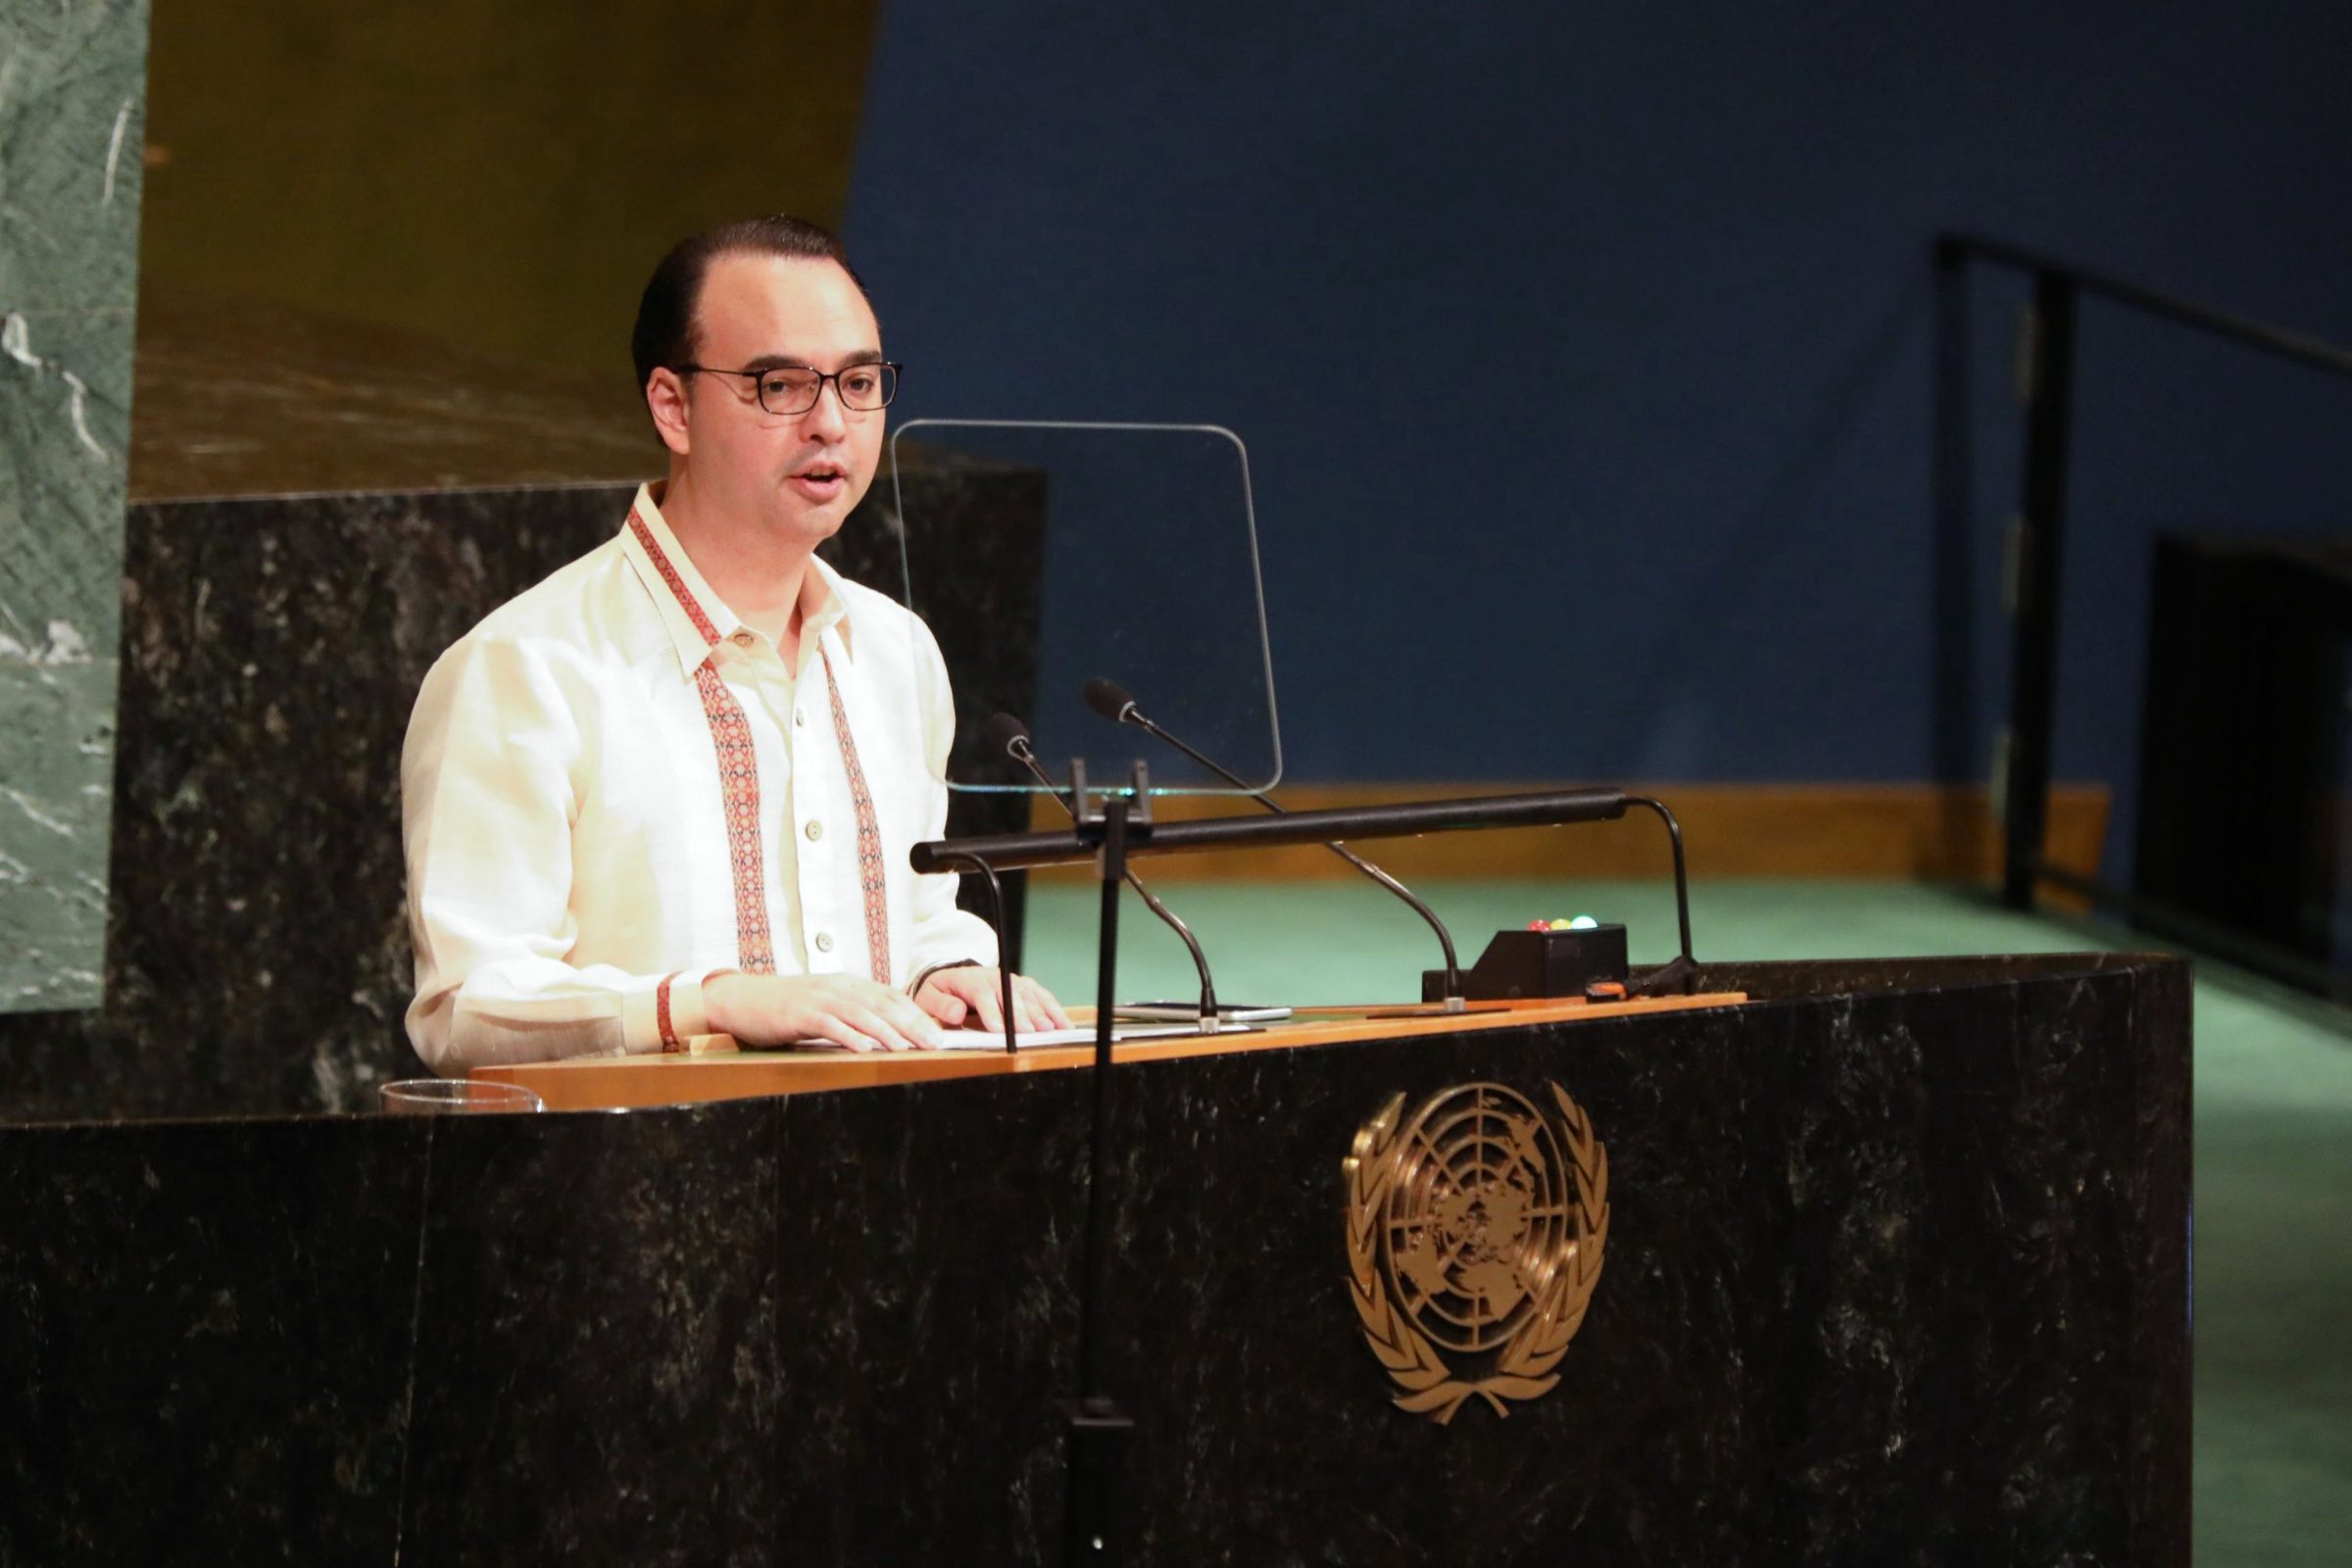 Human rights, security go together, Cayetano tells UN